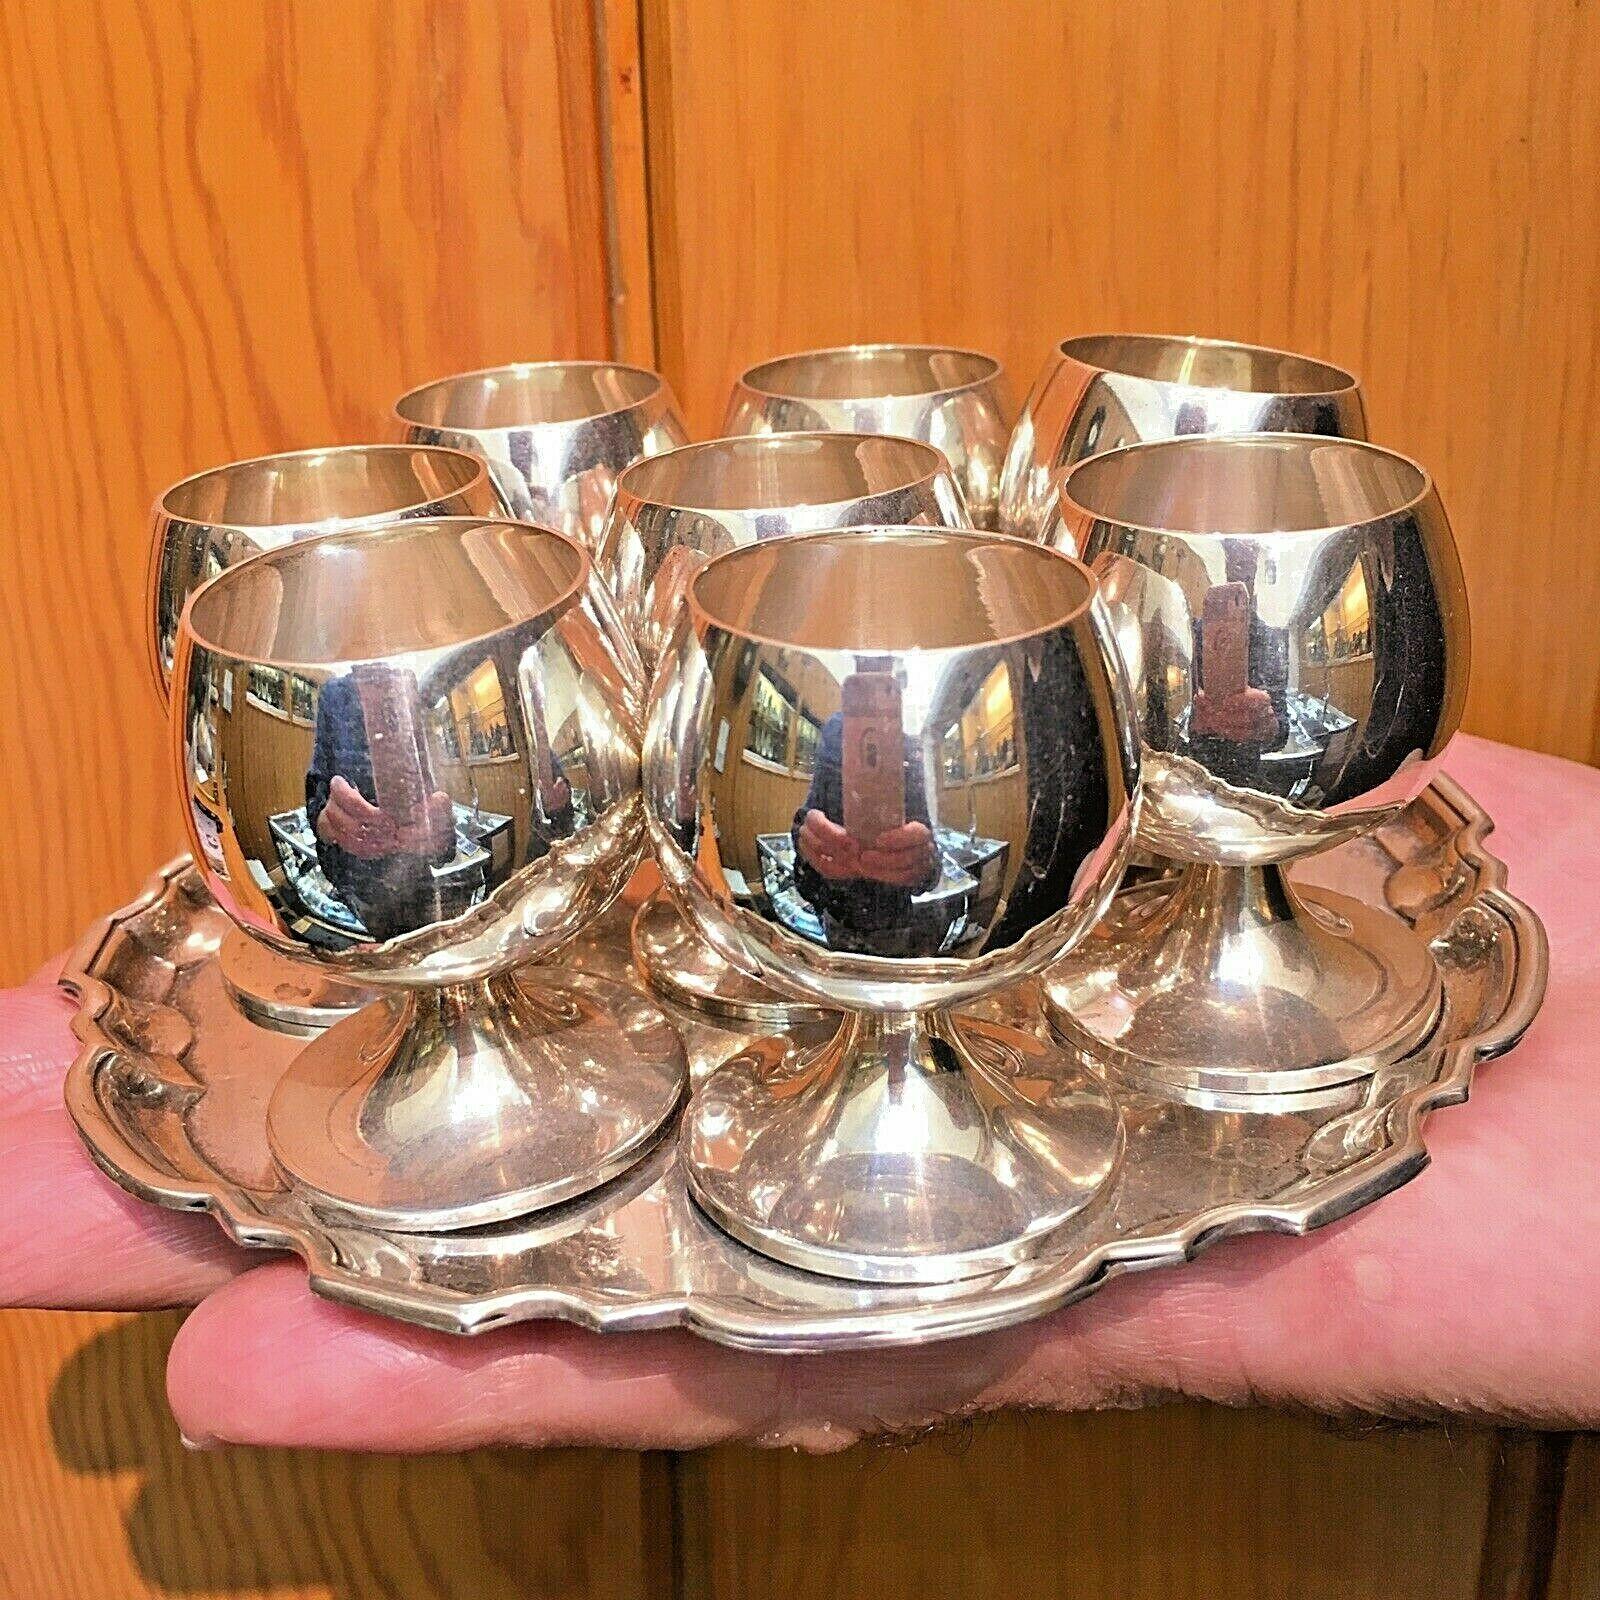 Tiffany & Co Sterling Silver Cup Shot Glass Set 22595L Plus Tray 23336 1